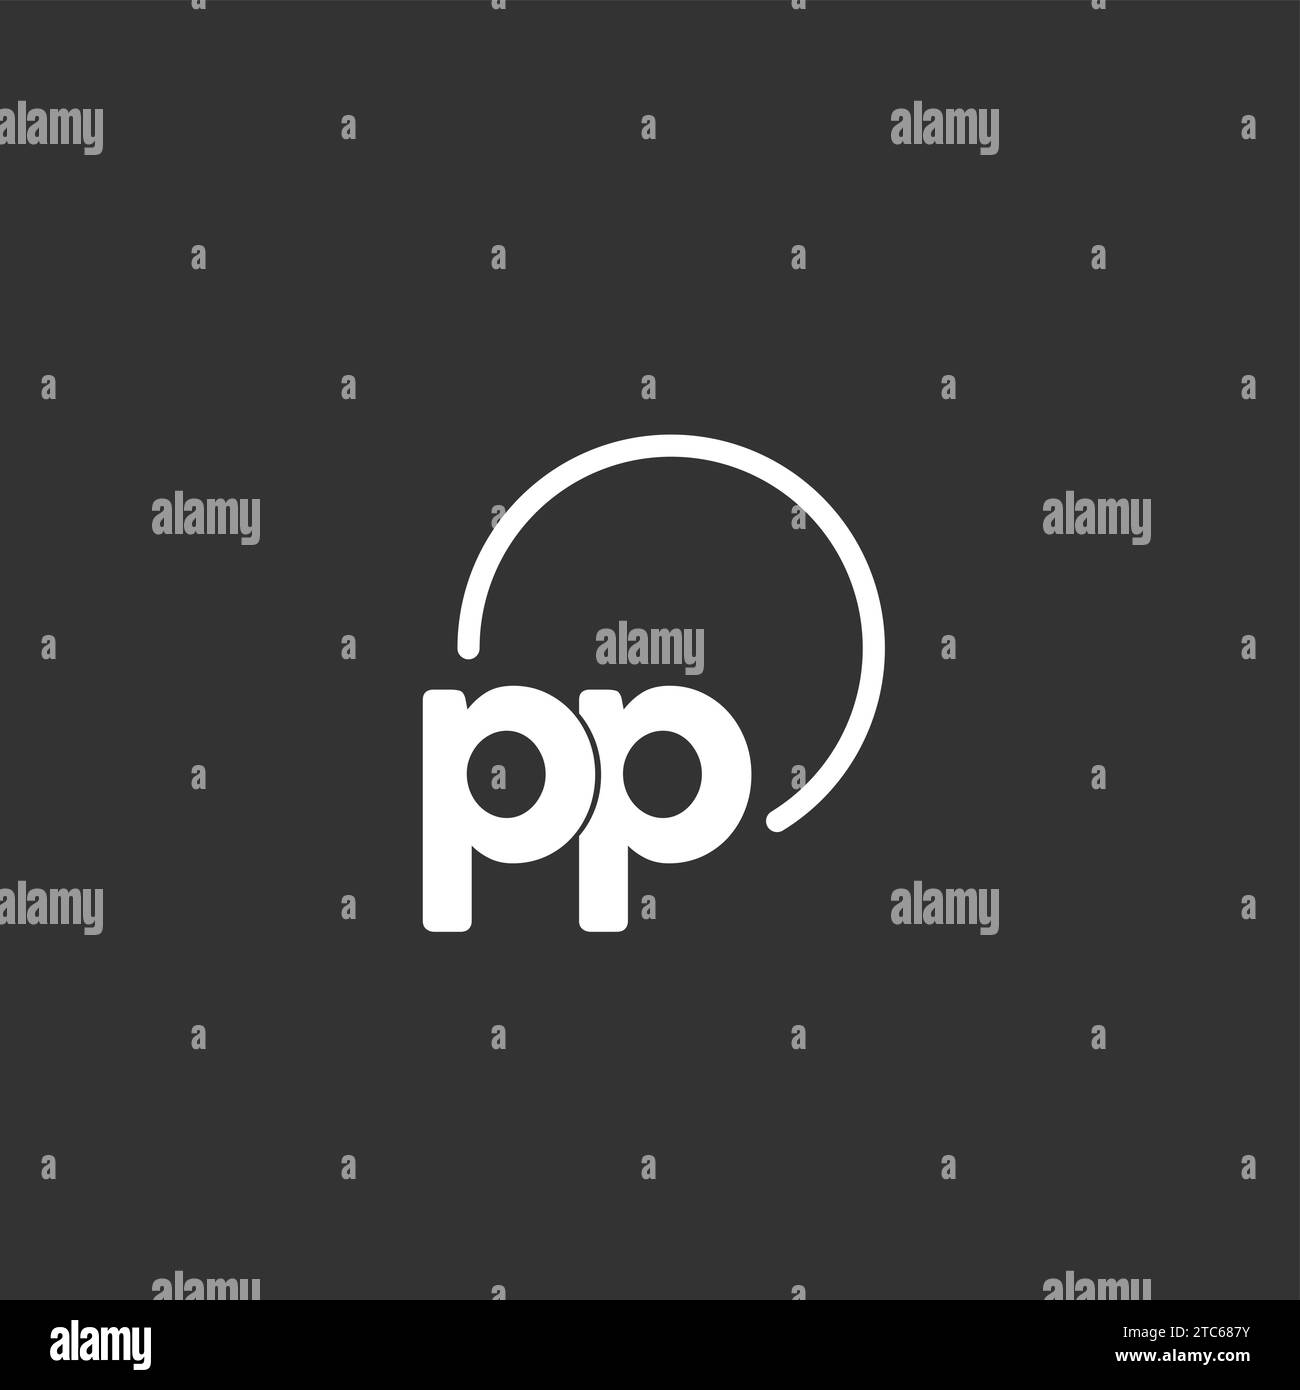 PP initial logo with rounded circle vector graphic Stock Vector